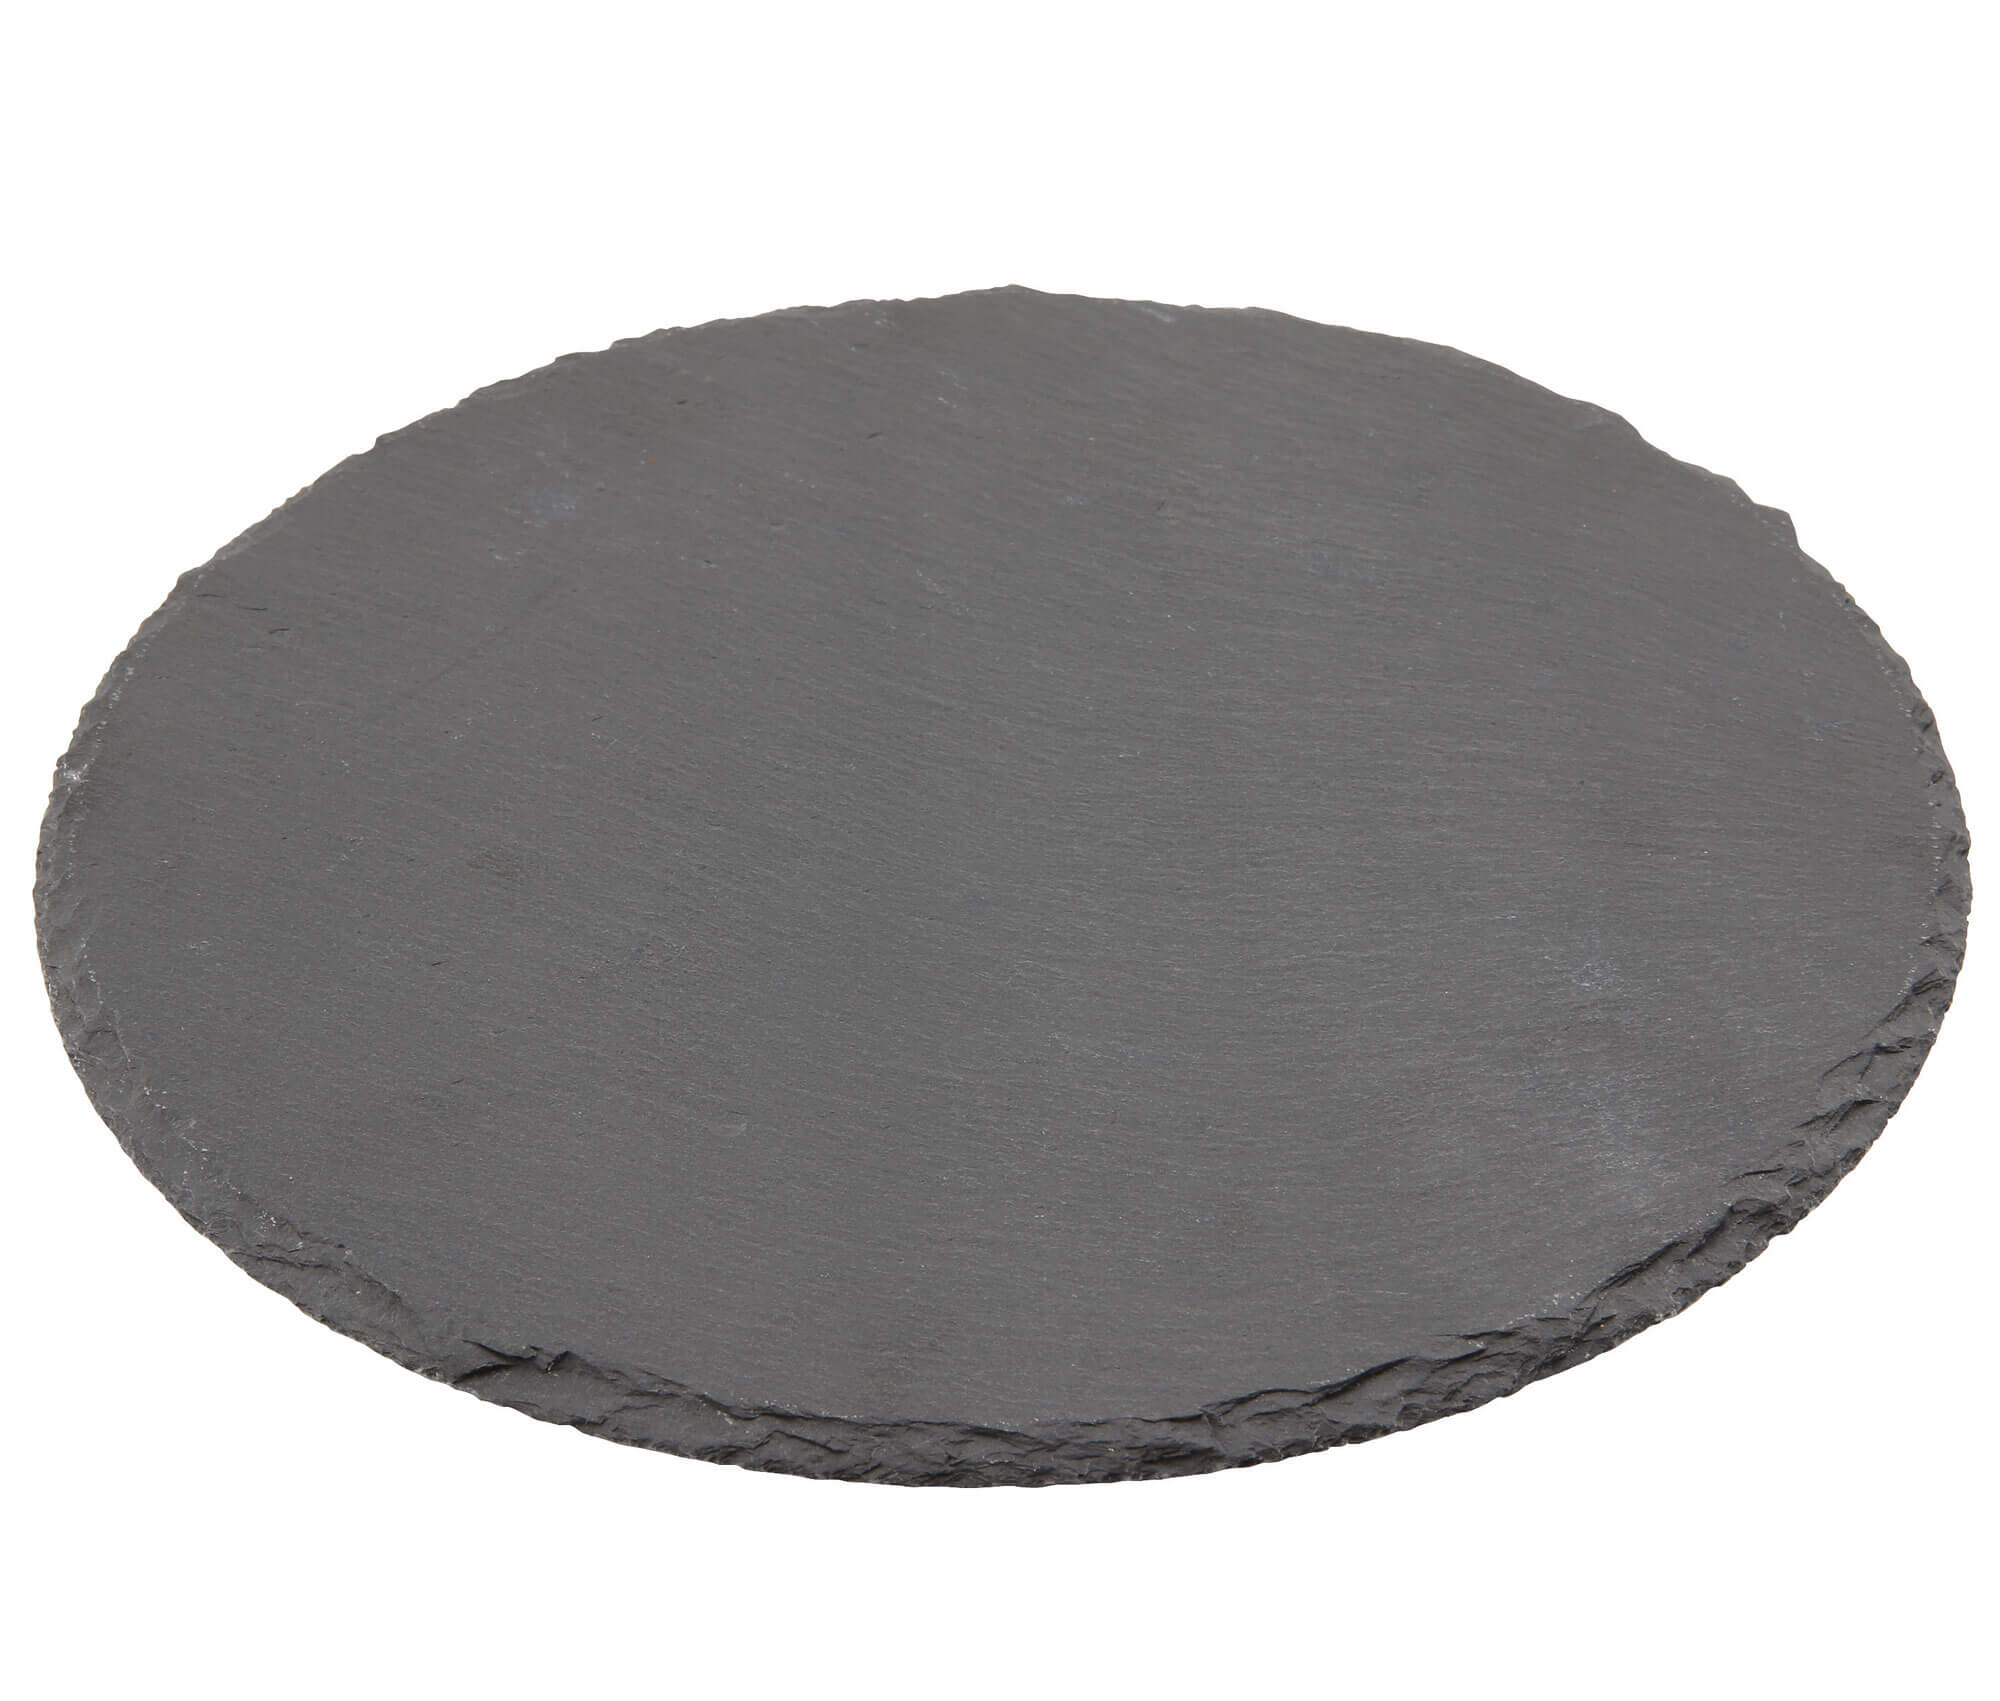 Slate serving plate, round - 30cm